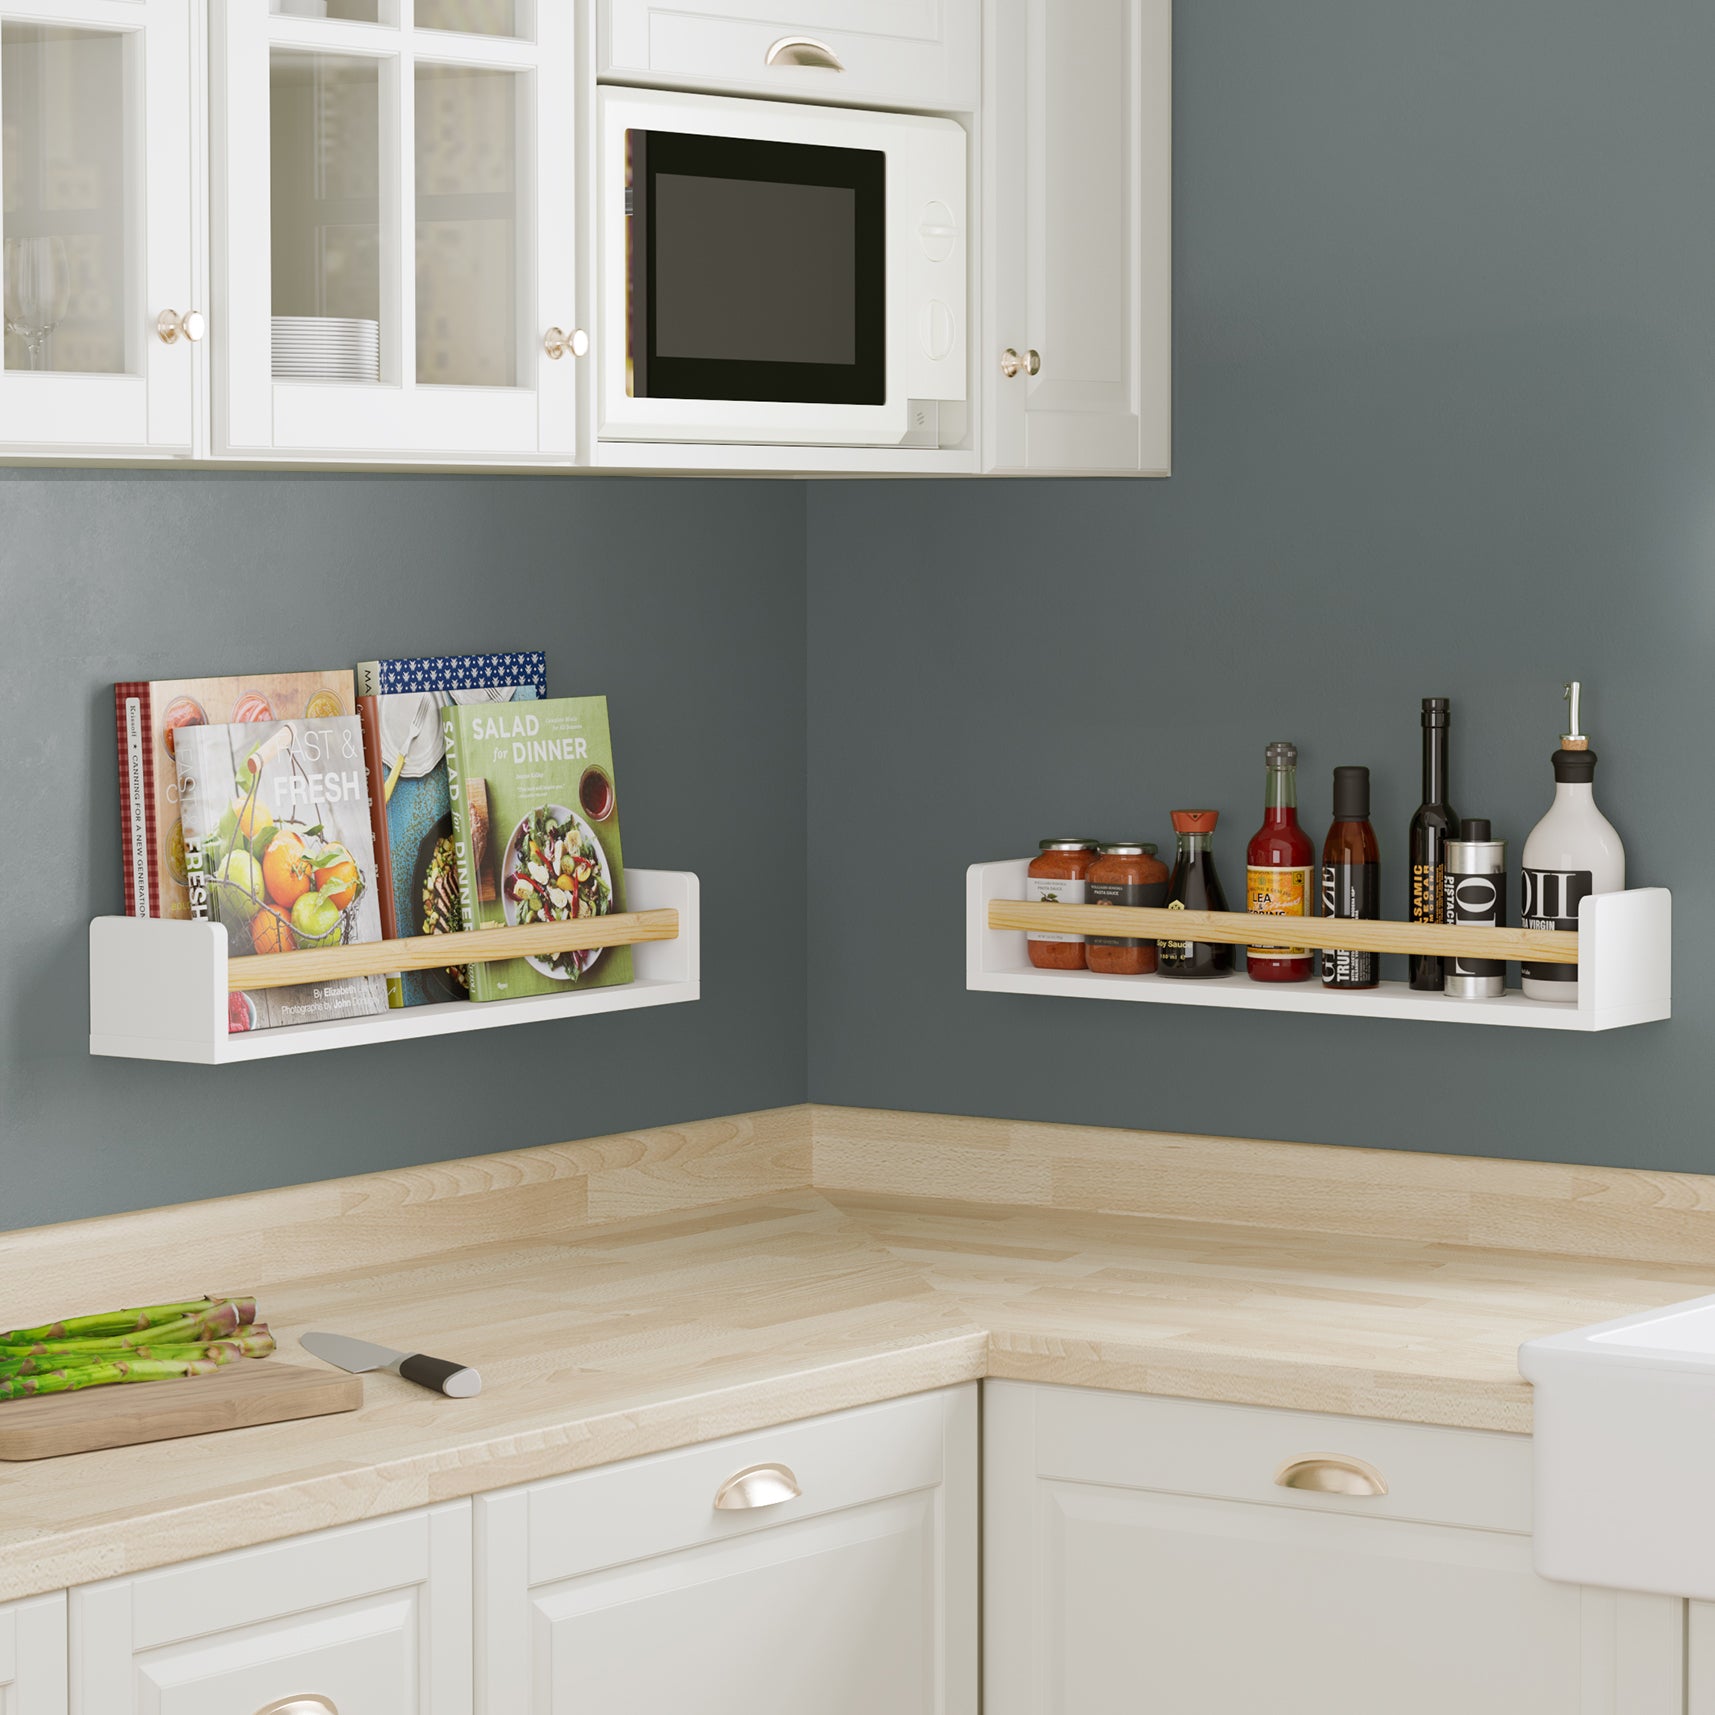 Two white wall shelves for kitchen with natural wood rods in a kitchen setting, holding cookbooks and condiments. Mounted on a dark gray wall above a light wood countertop, providing practical and stylish storage.